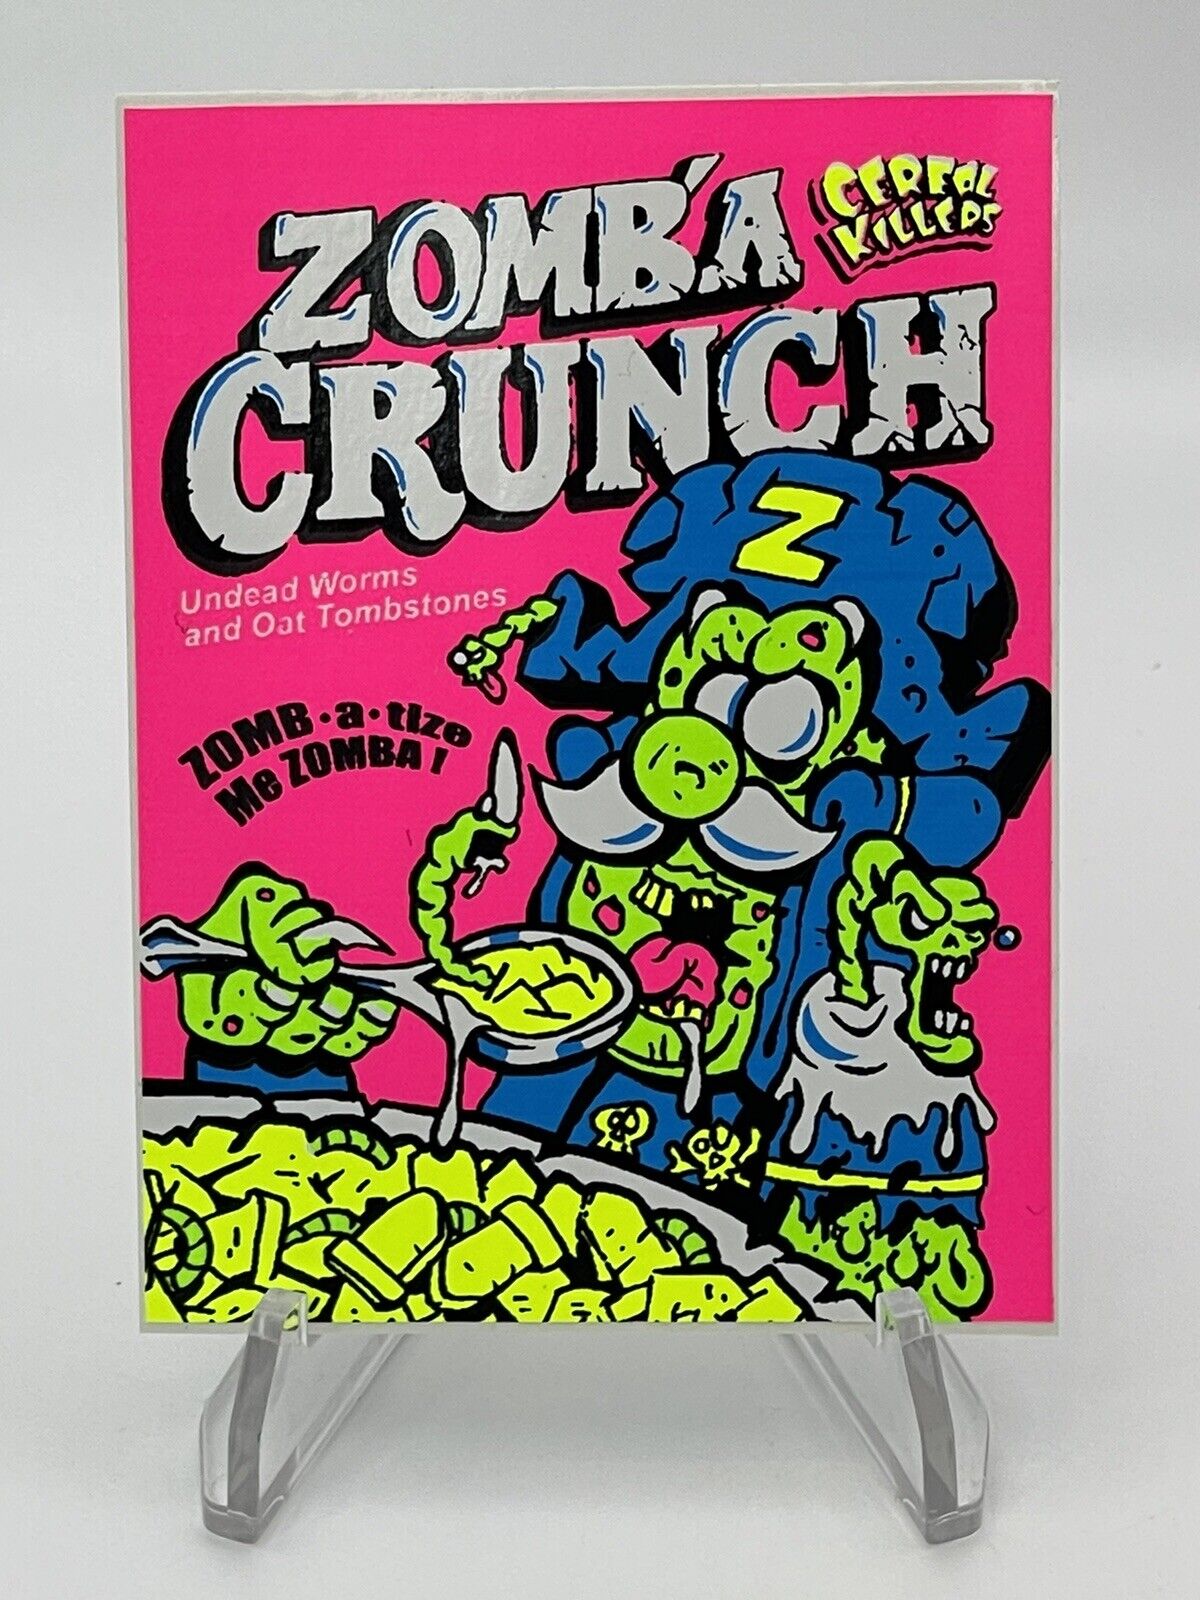 Wax-Eye Cereal Killers Series 1 Glow in the Dark Sticker Zomb\'a Crunch